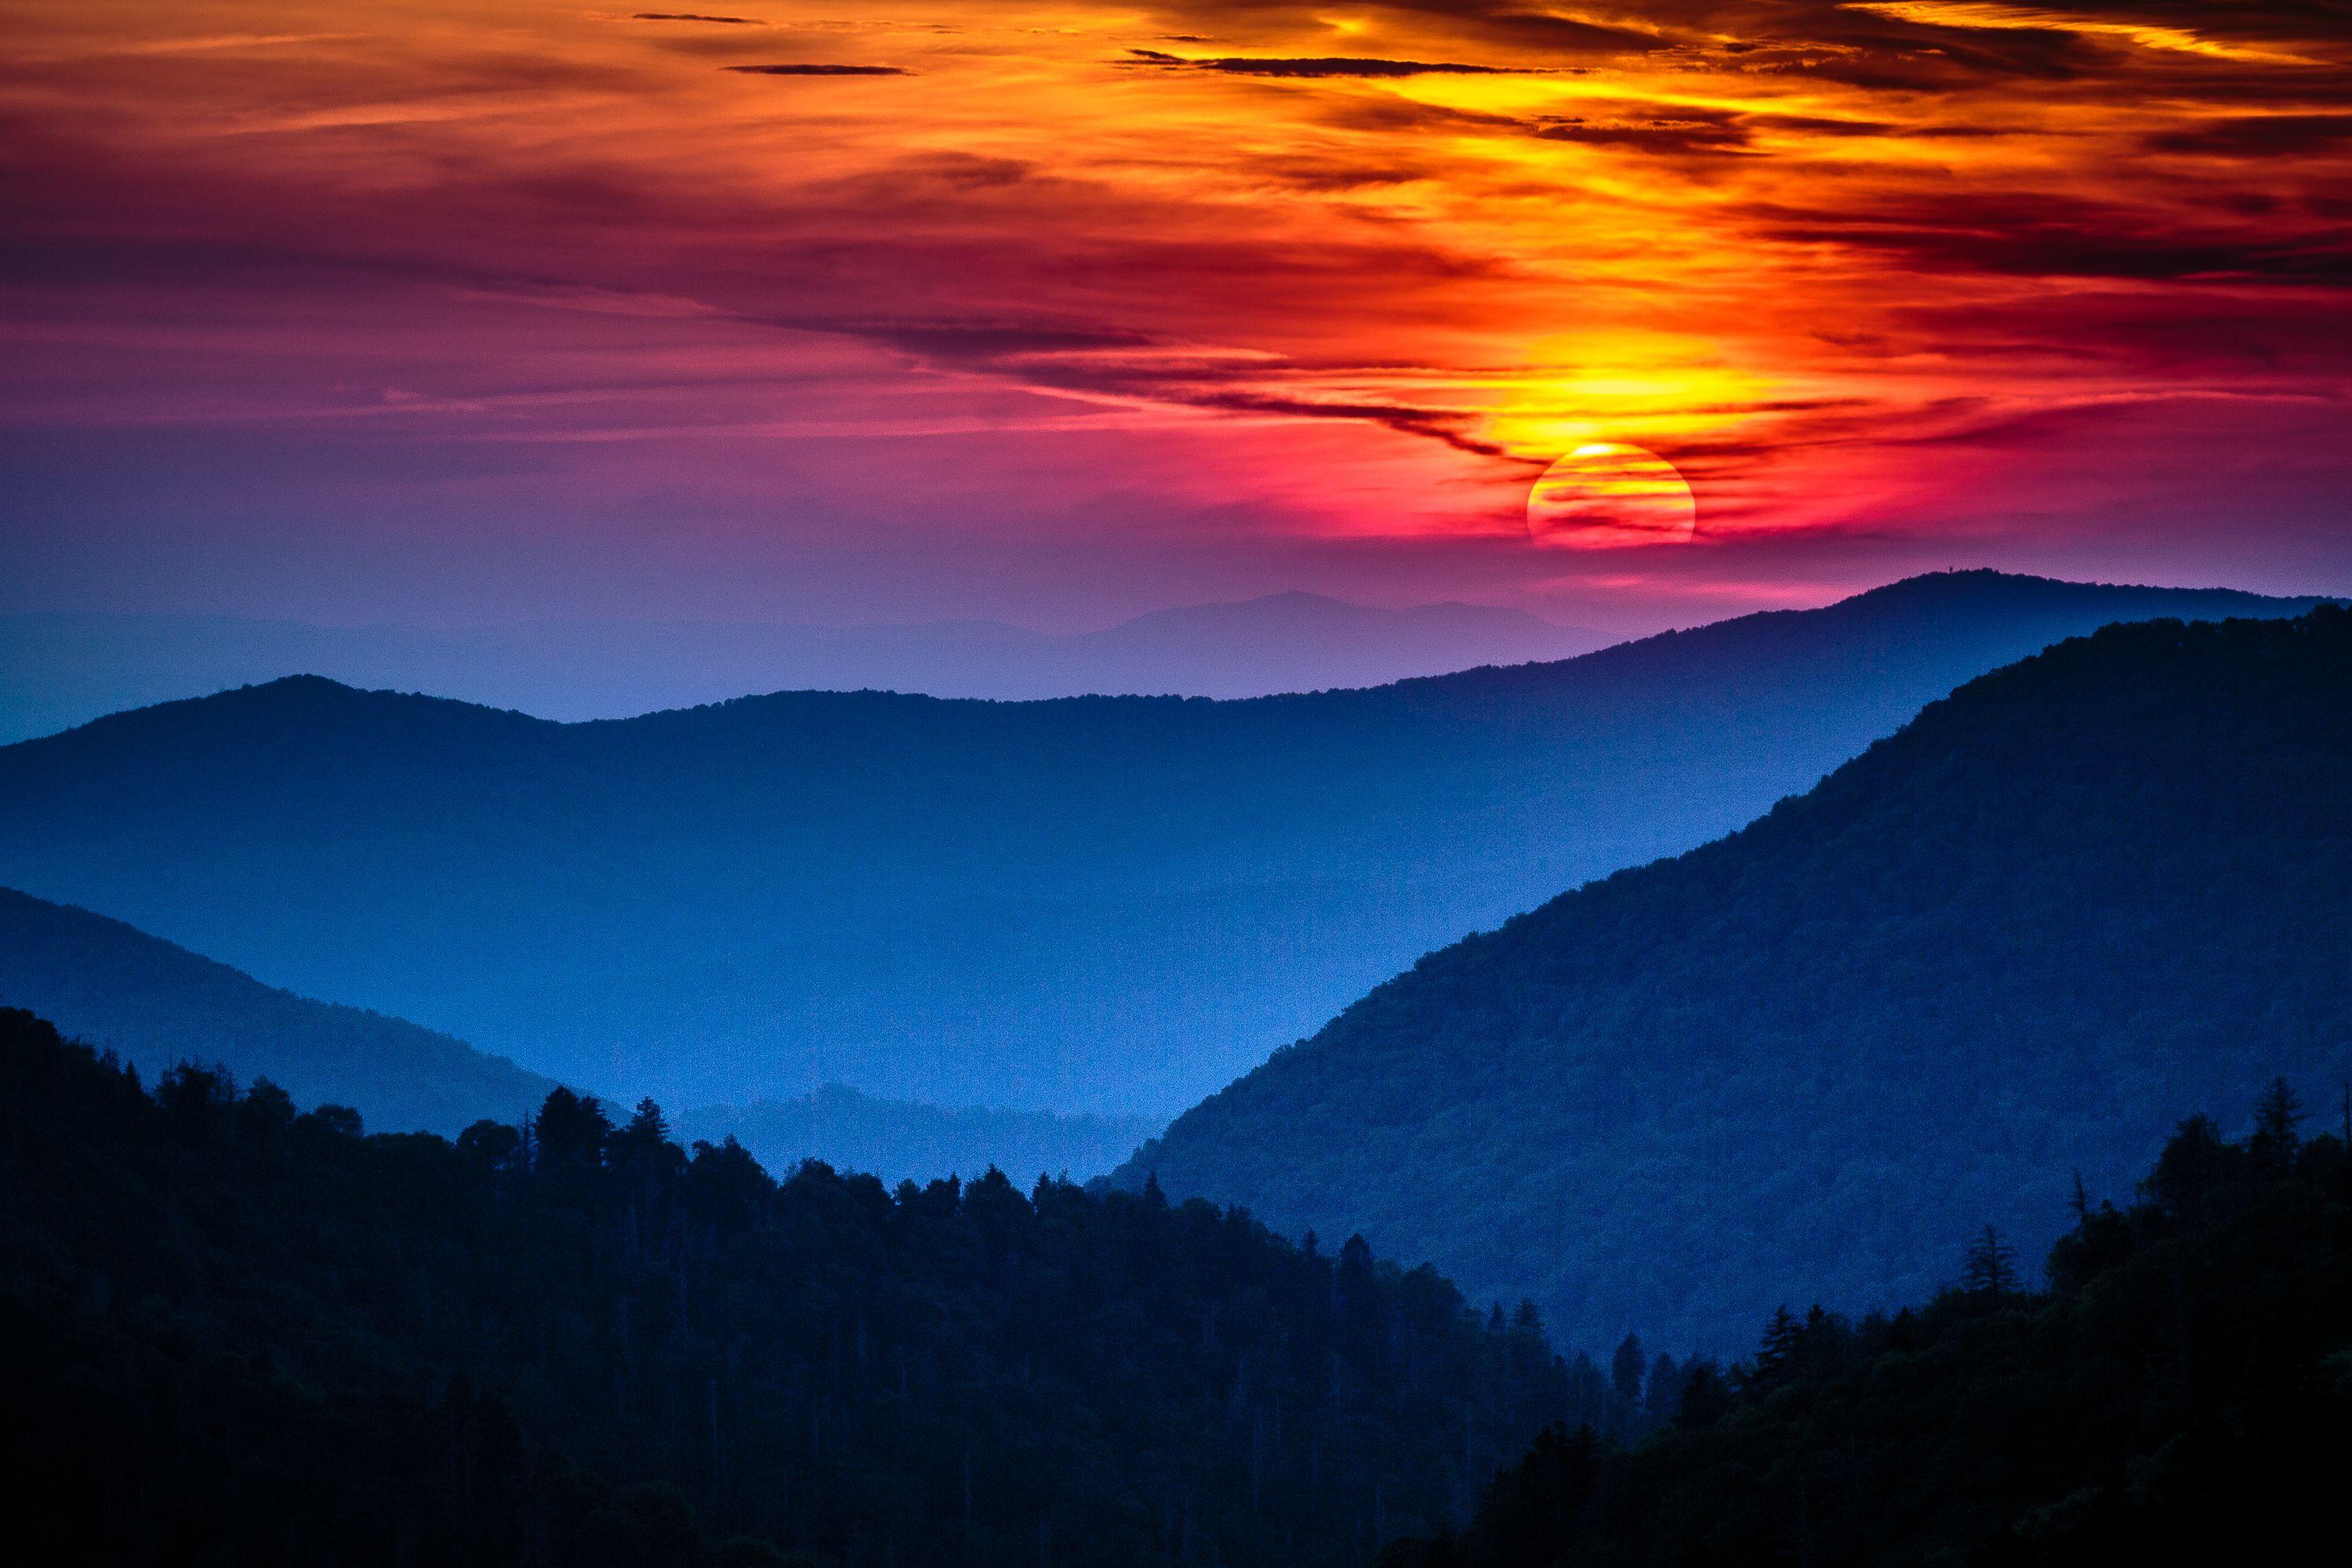 Breathtaking view of a Great Smoky Mountain sunrise. Who would